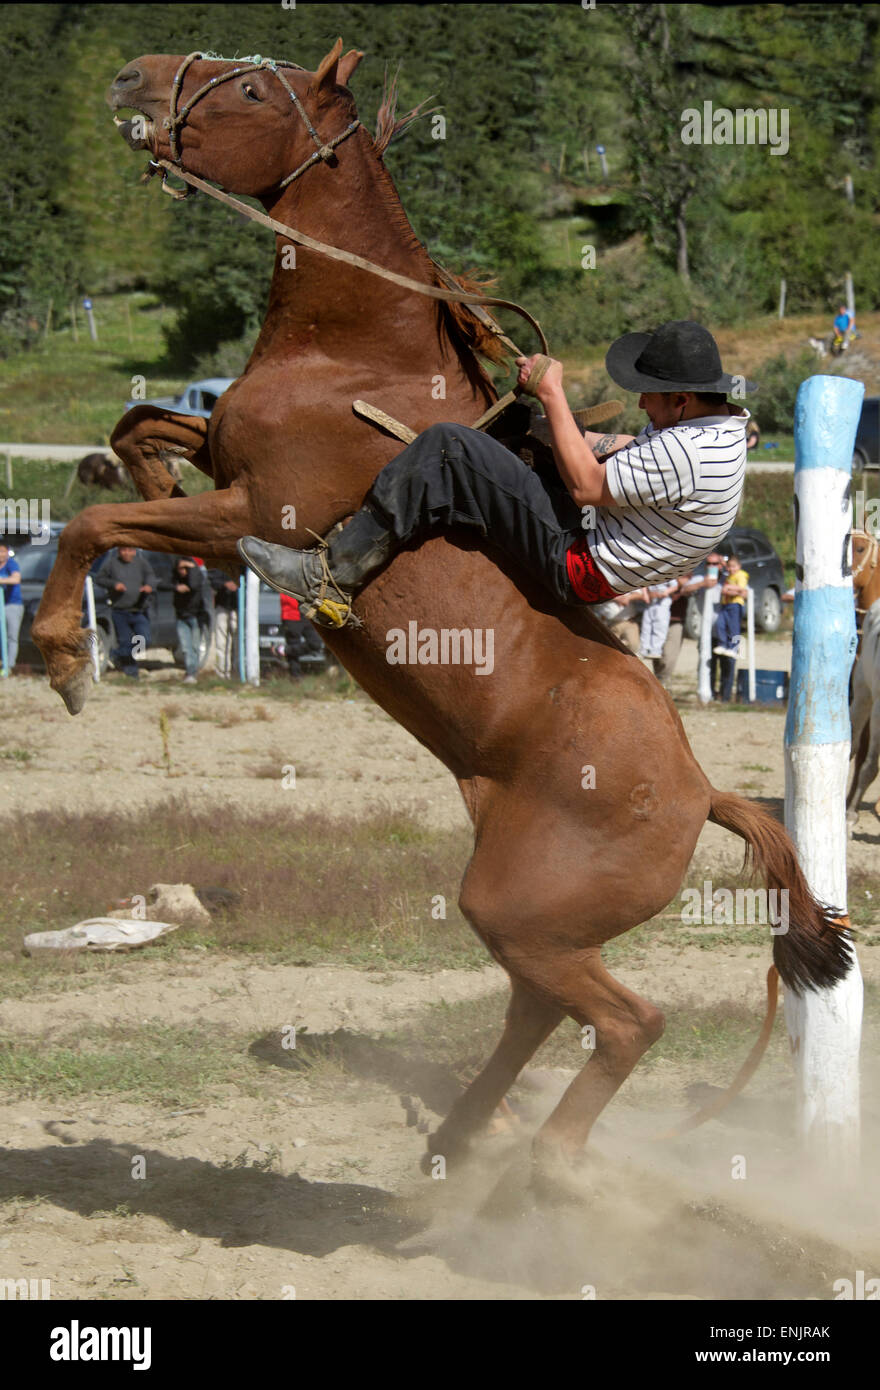 Gaucho riding bucking horse in country rodeo Tierra del Fuego Argentina Stock Photo